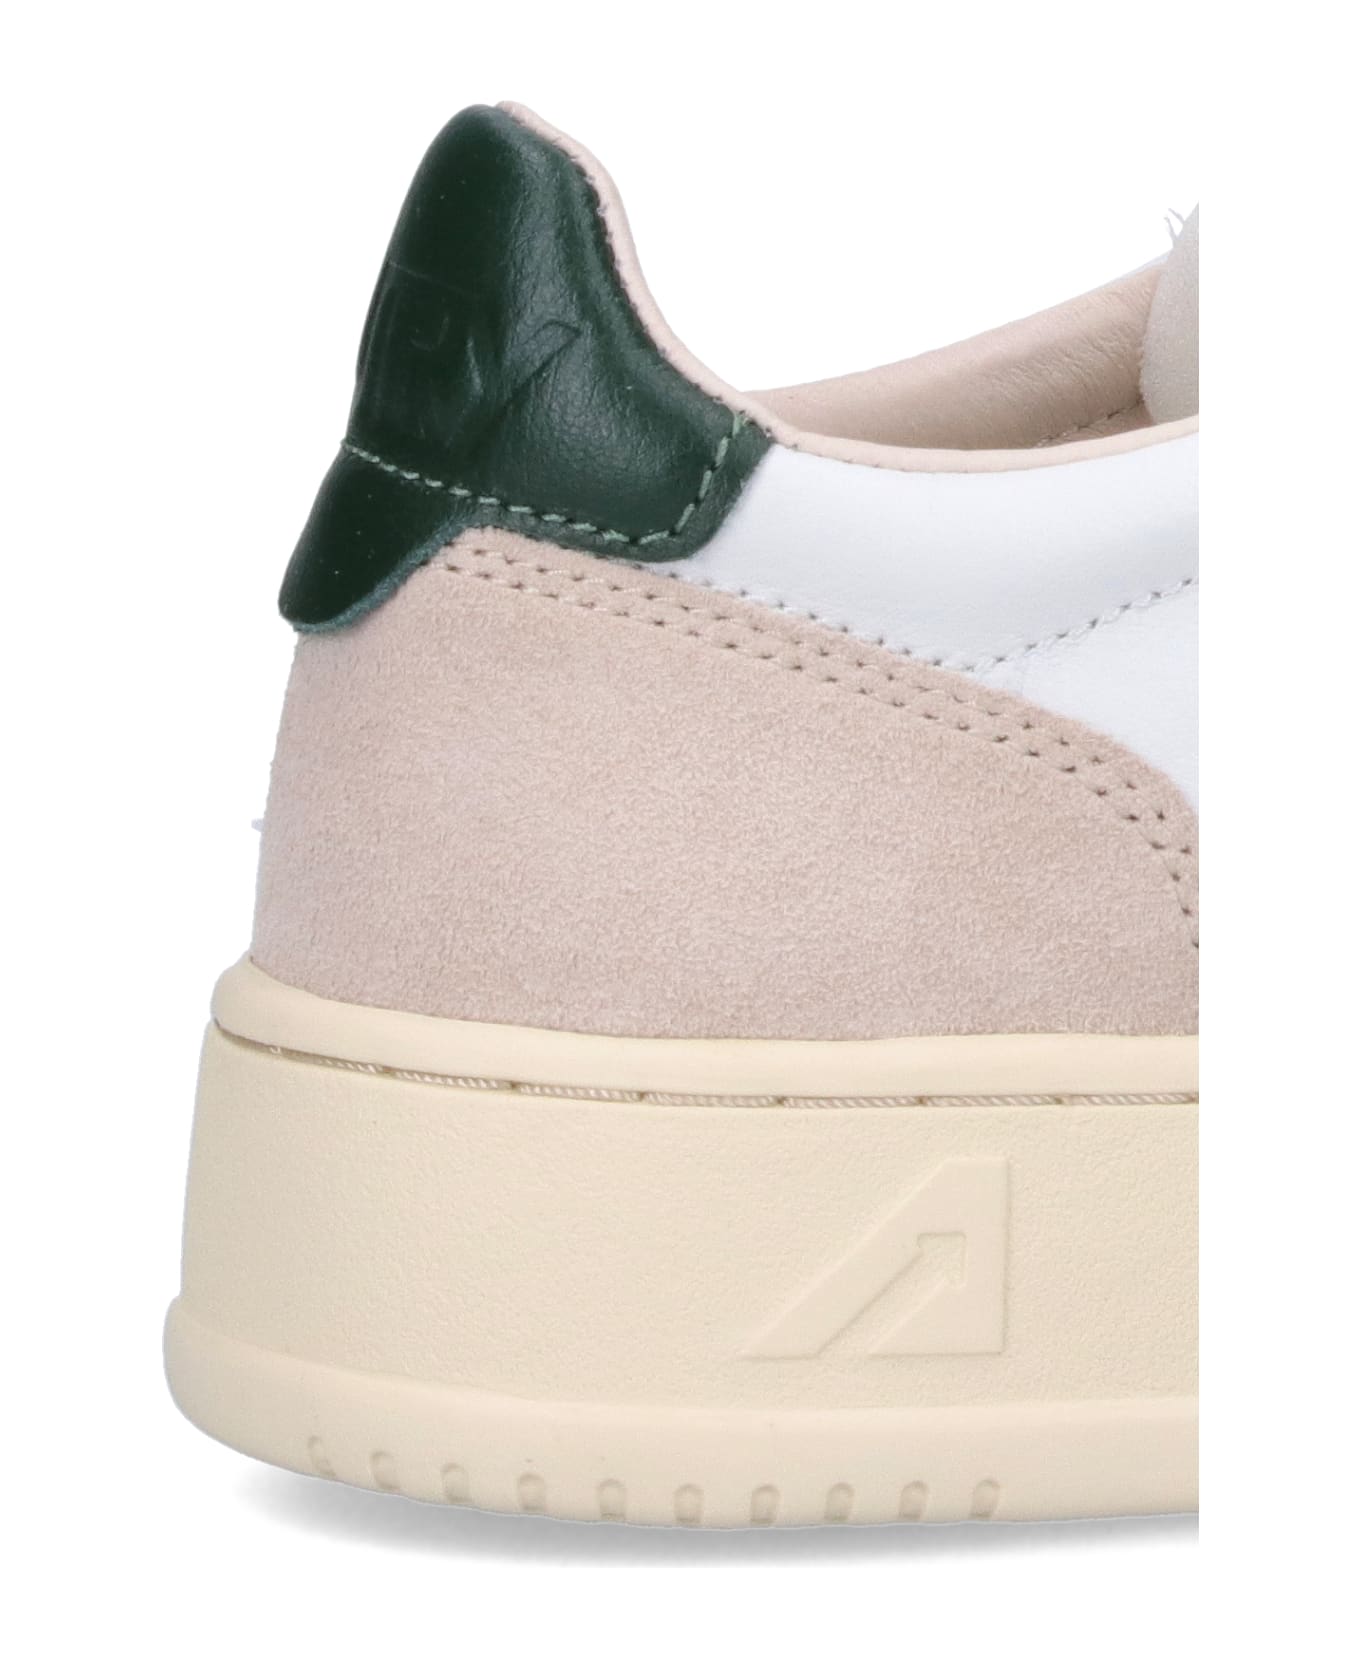 Autry Medalist Low Sneakers In White And Dark Green Suede And Leather - White スニーカー